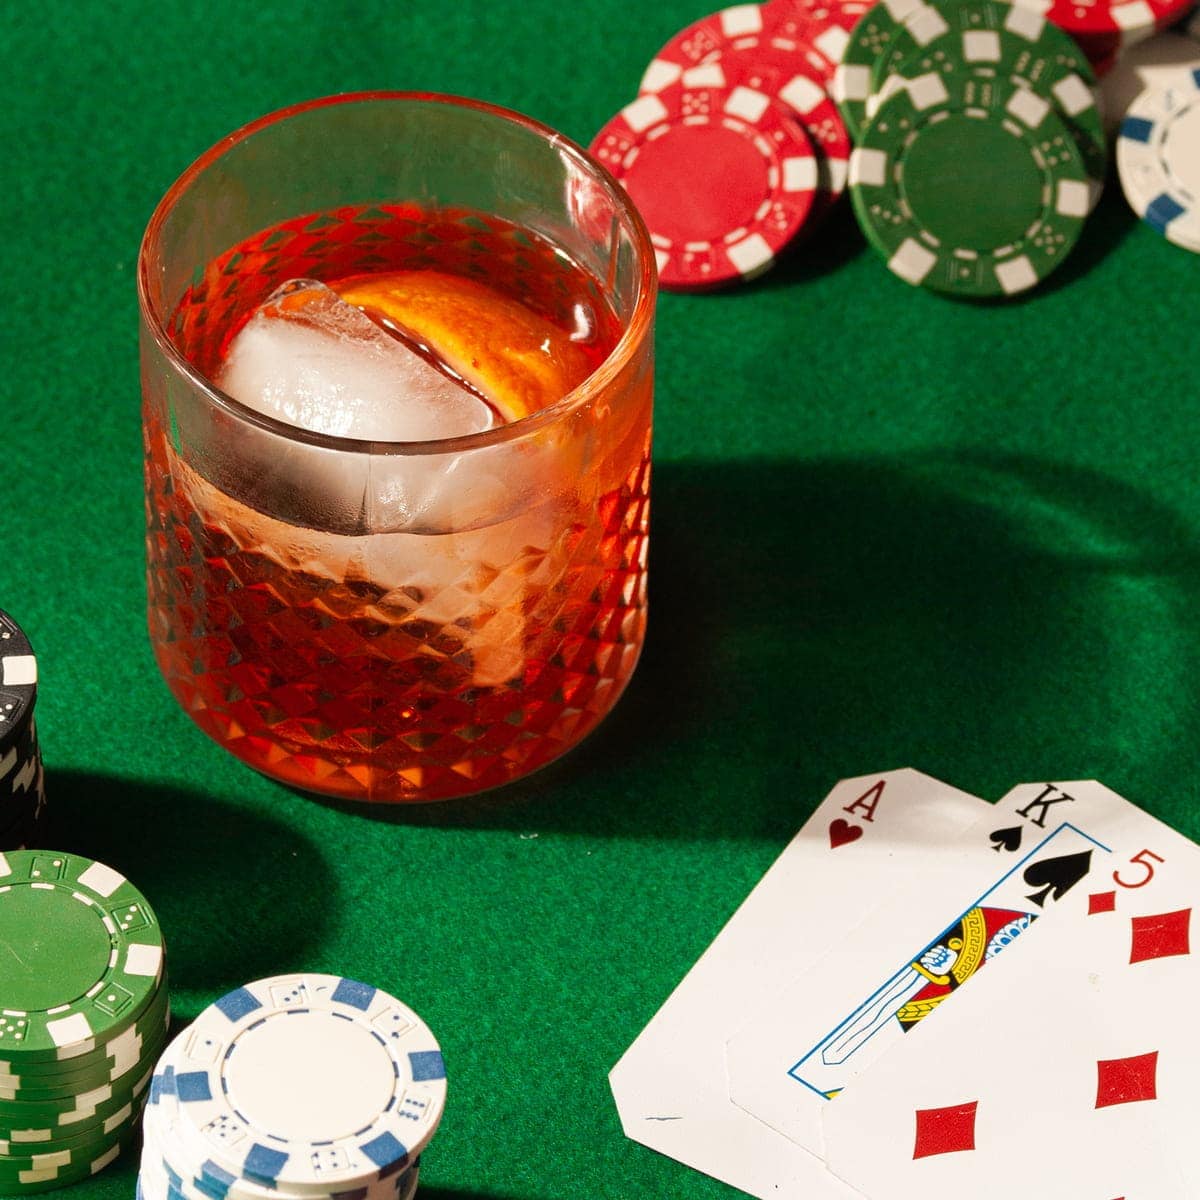 Aperol Old Fashioned on green felt surrounded by poker chips